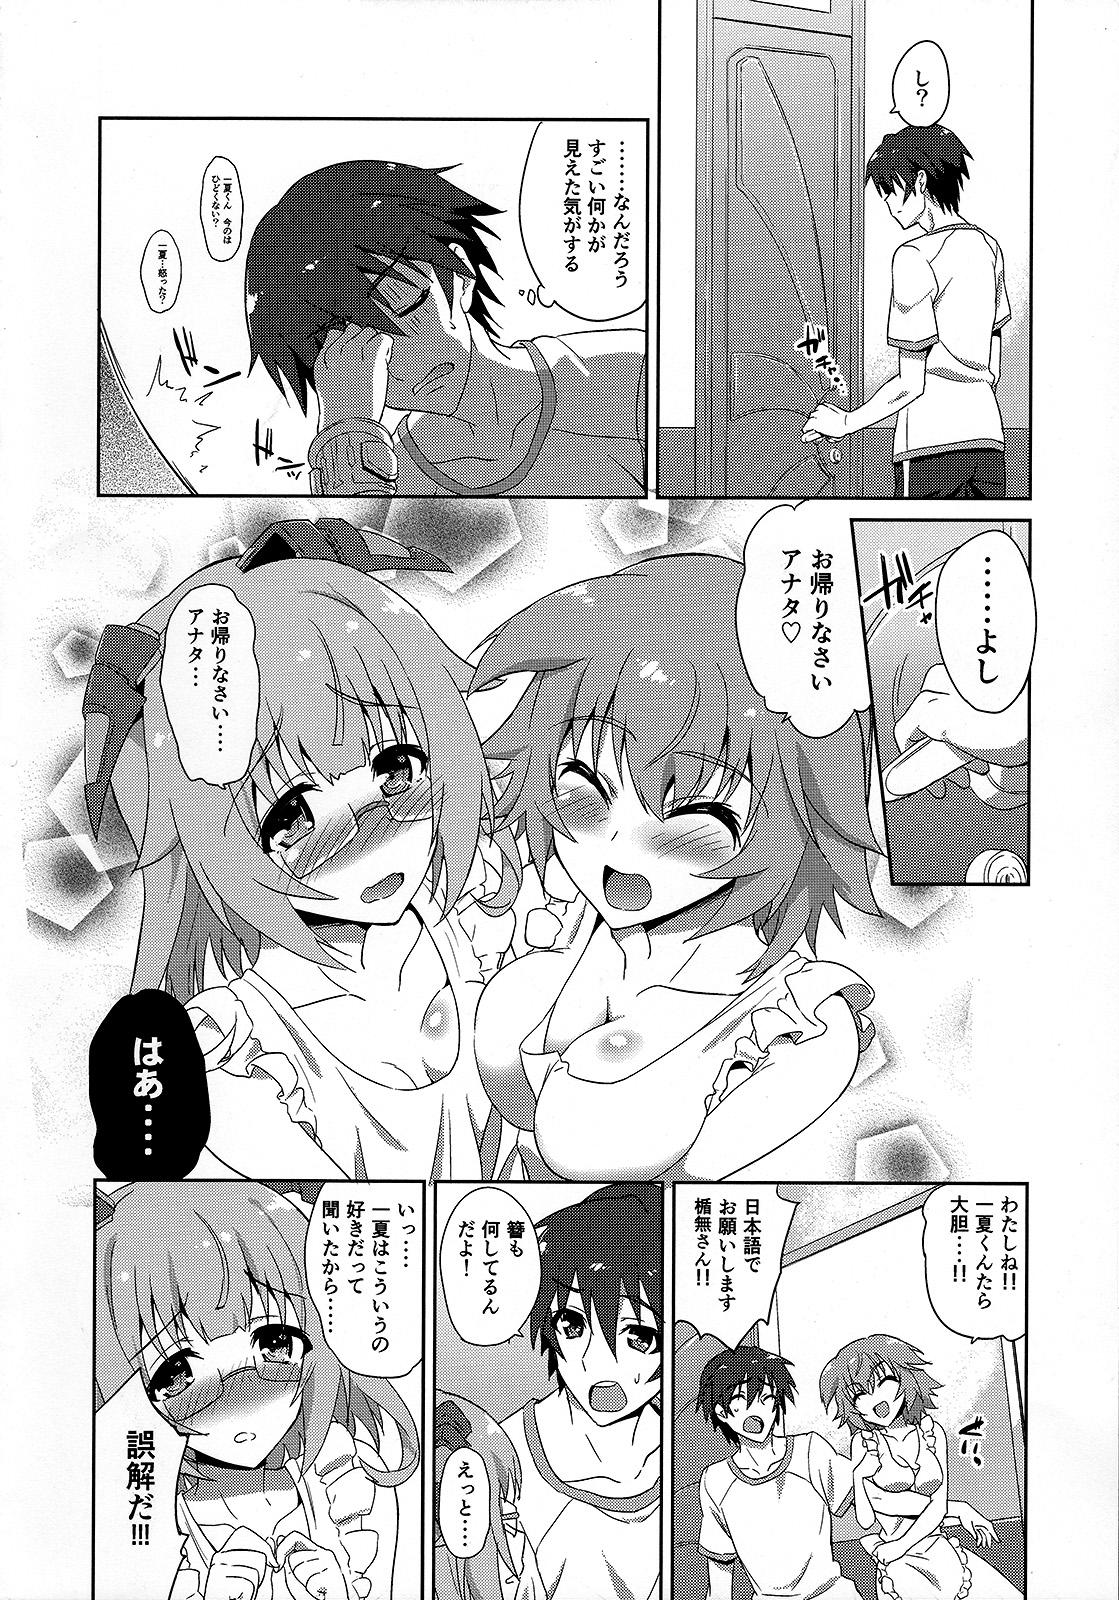 Amature Porn IS ICHIKA LOVE SISTERS!! - Infinite stratos Teen Blowjob - Page 3